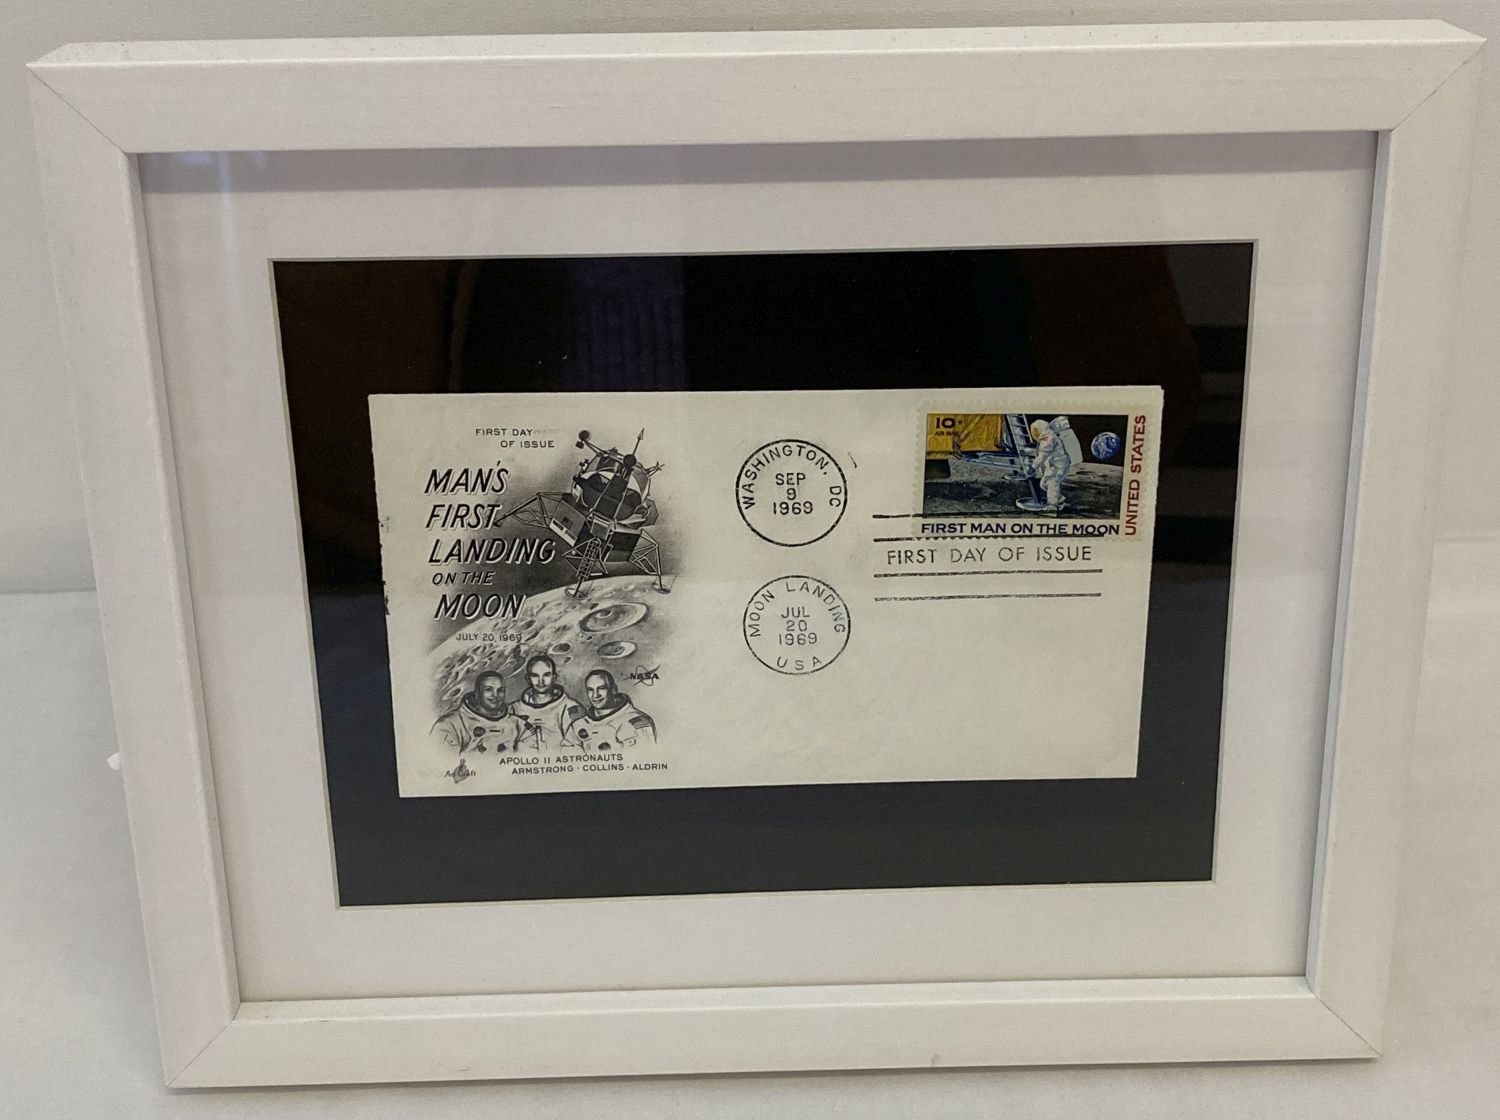 A framed and glazed American 1969 first day cover "Man's First Landing On The Moon".